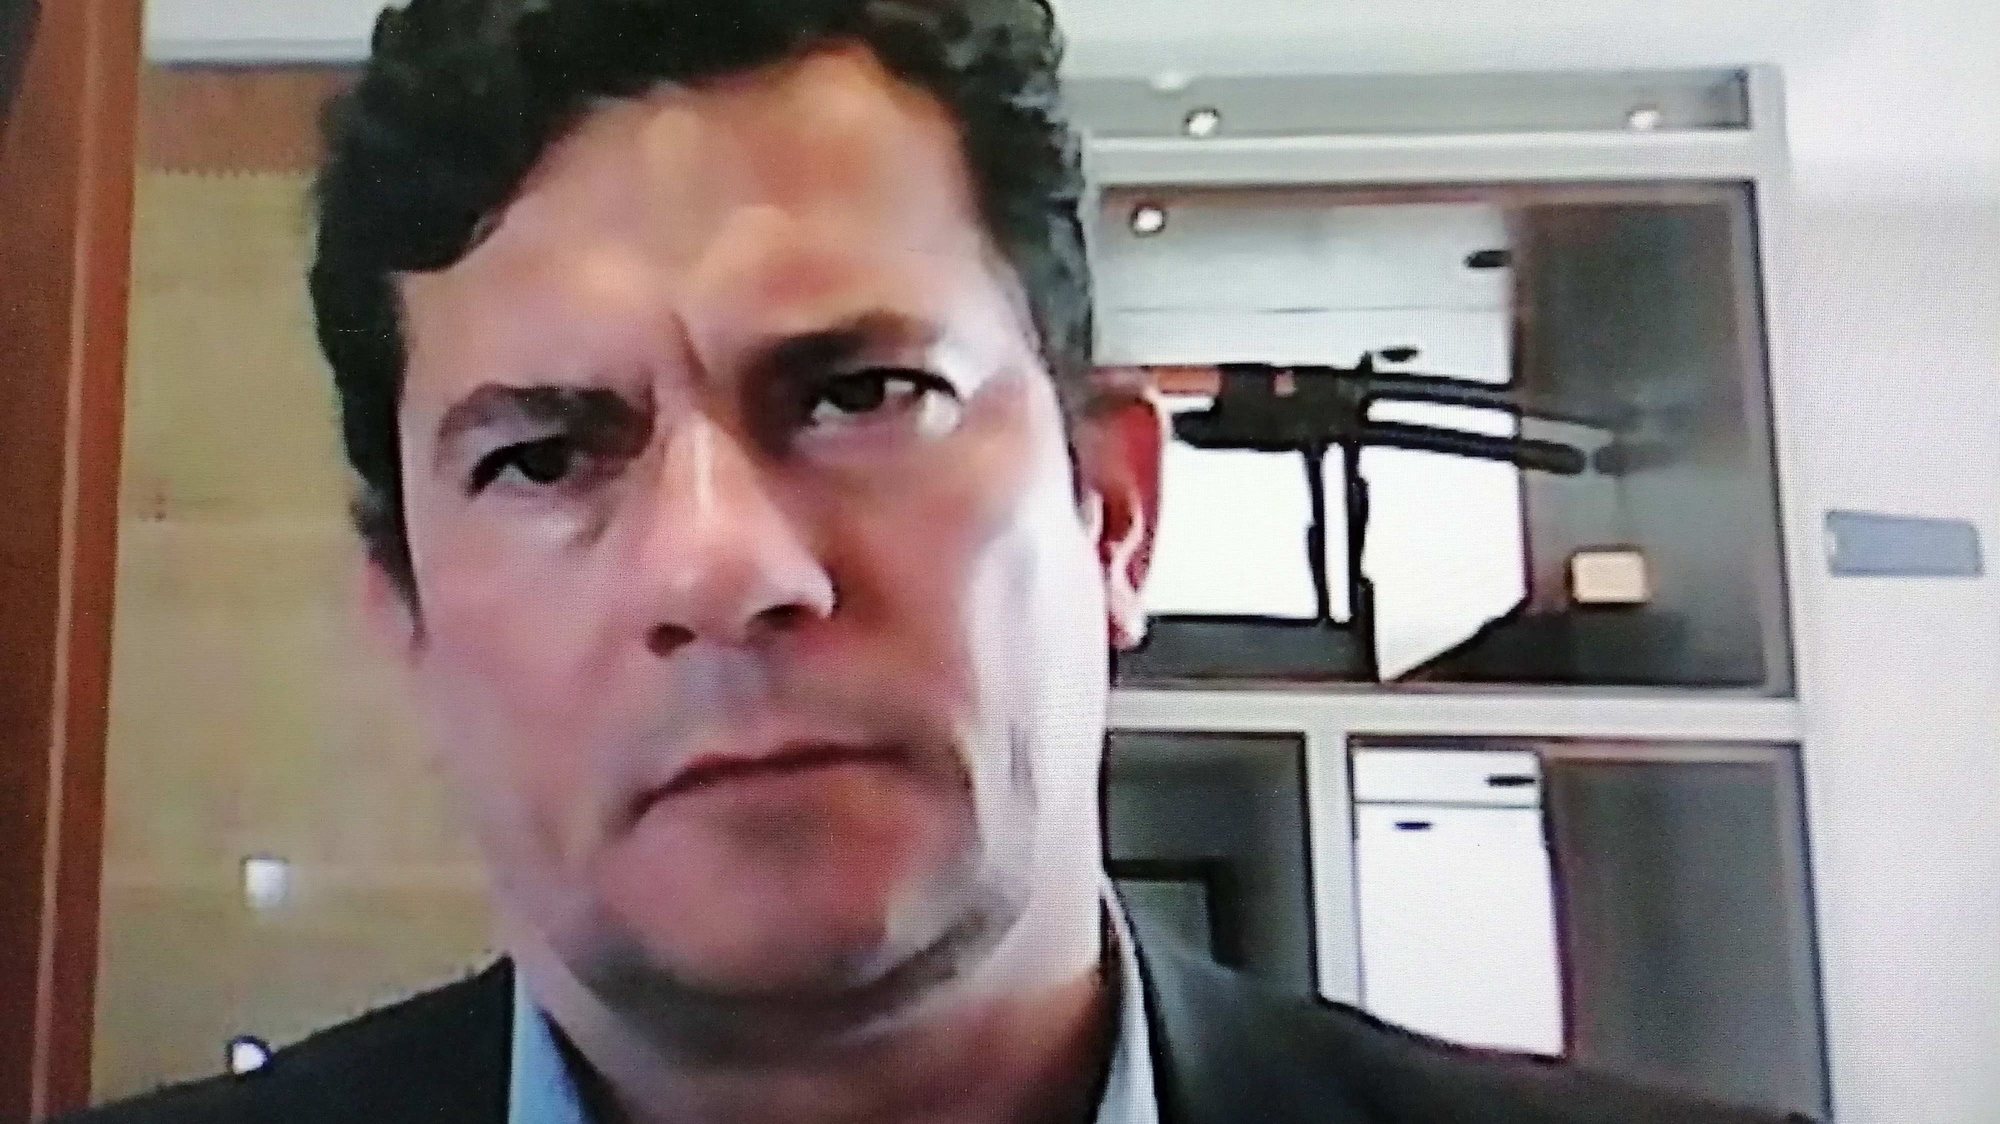 epa08536687 Screenshot showing Sergio Moro, former Minister of Justice and Public Security of Brazil, during a virtual interview with Efe, in Sao Paulo, Brazil, 08 July 2020 (issued 09 July). &quot;I have doubts to what extent the autonomy of control bodies is guaranteed&quot; for fighting corruption in the government of Jair Bolsonaro, Sergio Moro, famous for his fight against impunity in Brazil and powerful Minister of Justice and Justice, said in an interview. Public Security until April. Moro, 47, was judge of the &quot;Lava Jato&quot; anti-corruption mega-operation, which since 2014 took dozens of businessmen and politicians to prison, including former President Luiz Inacio Lula da Silva - who has been released since November 2019 after being imprisoned for one year and seven months.  EPA/Ceciclia Malavoglia BEST QUALITY AVAILABLE